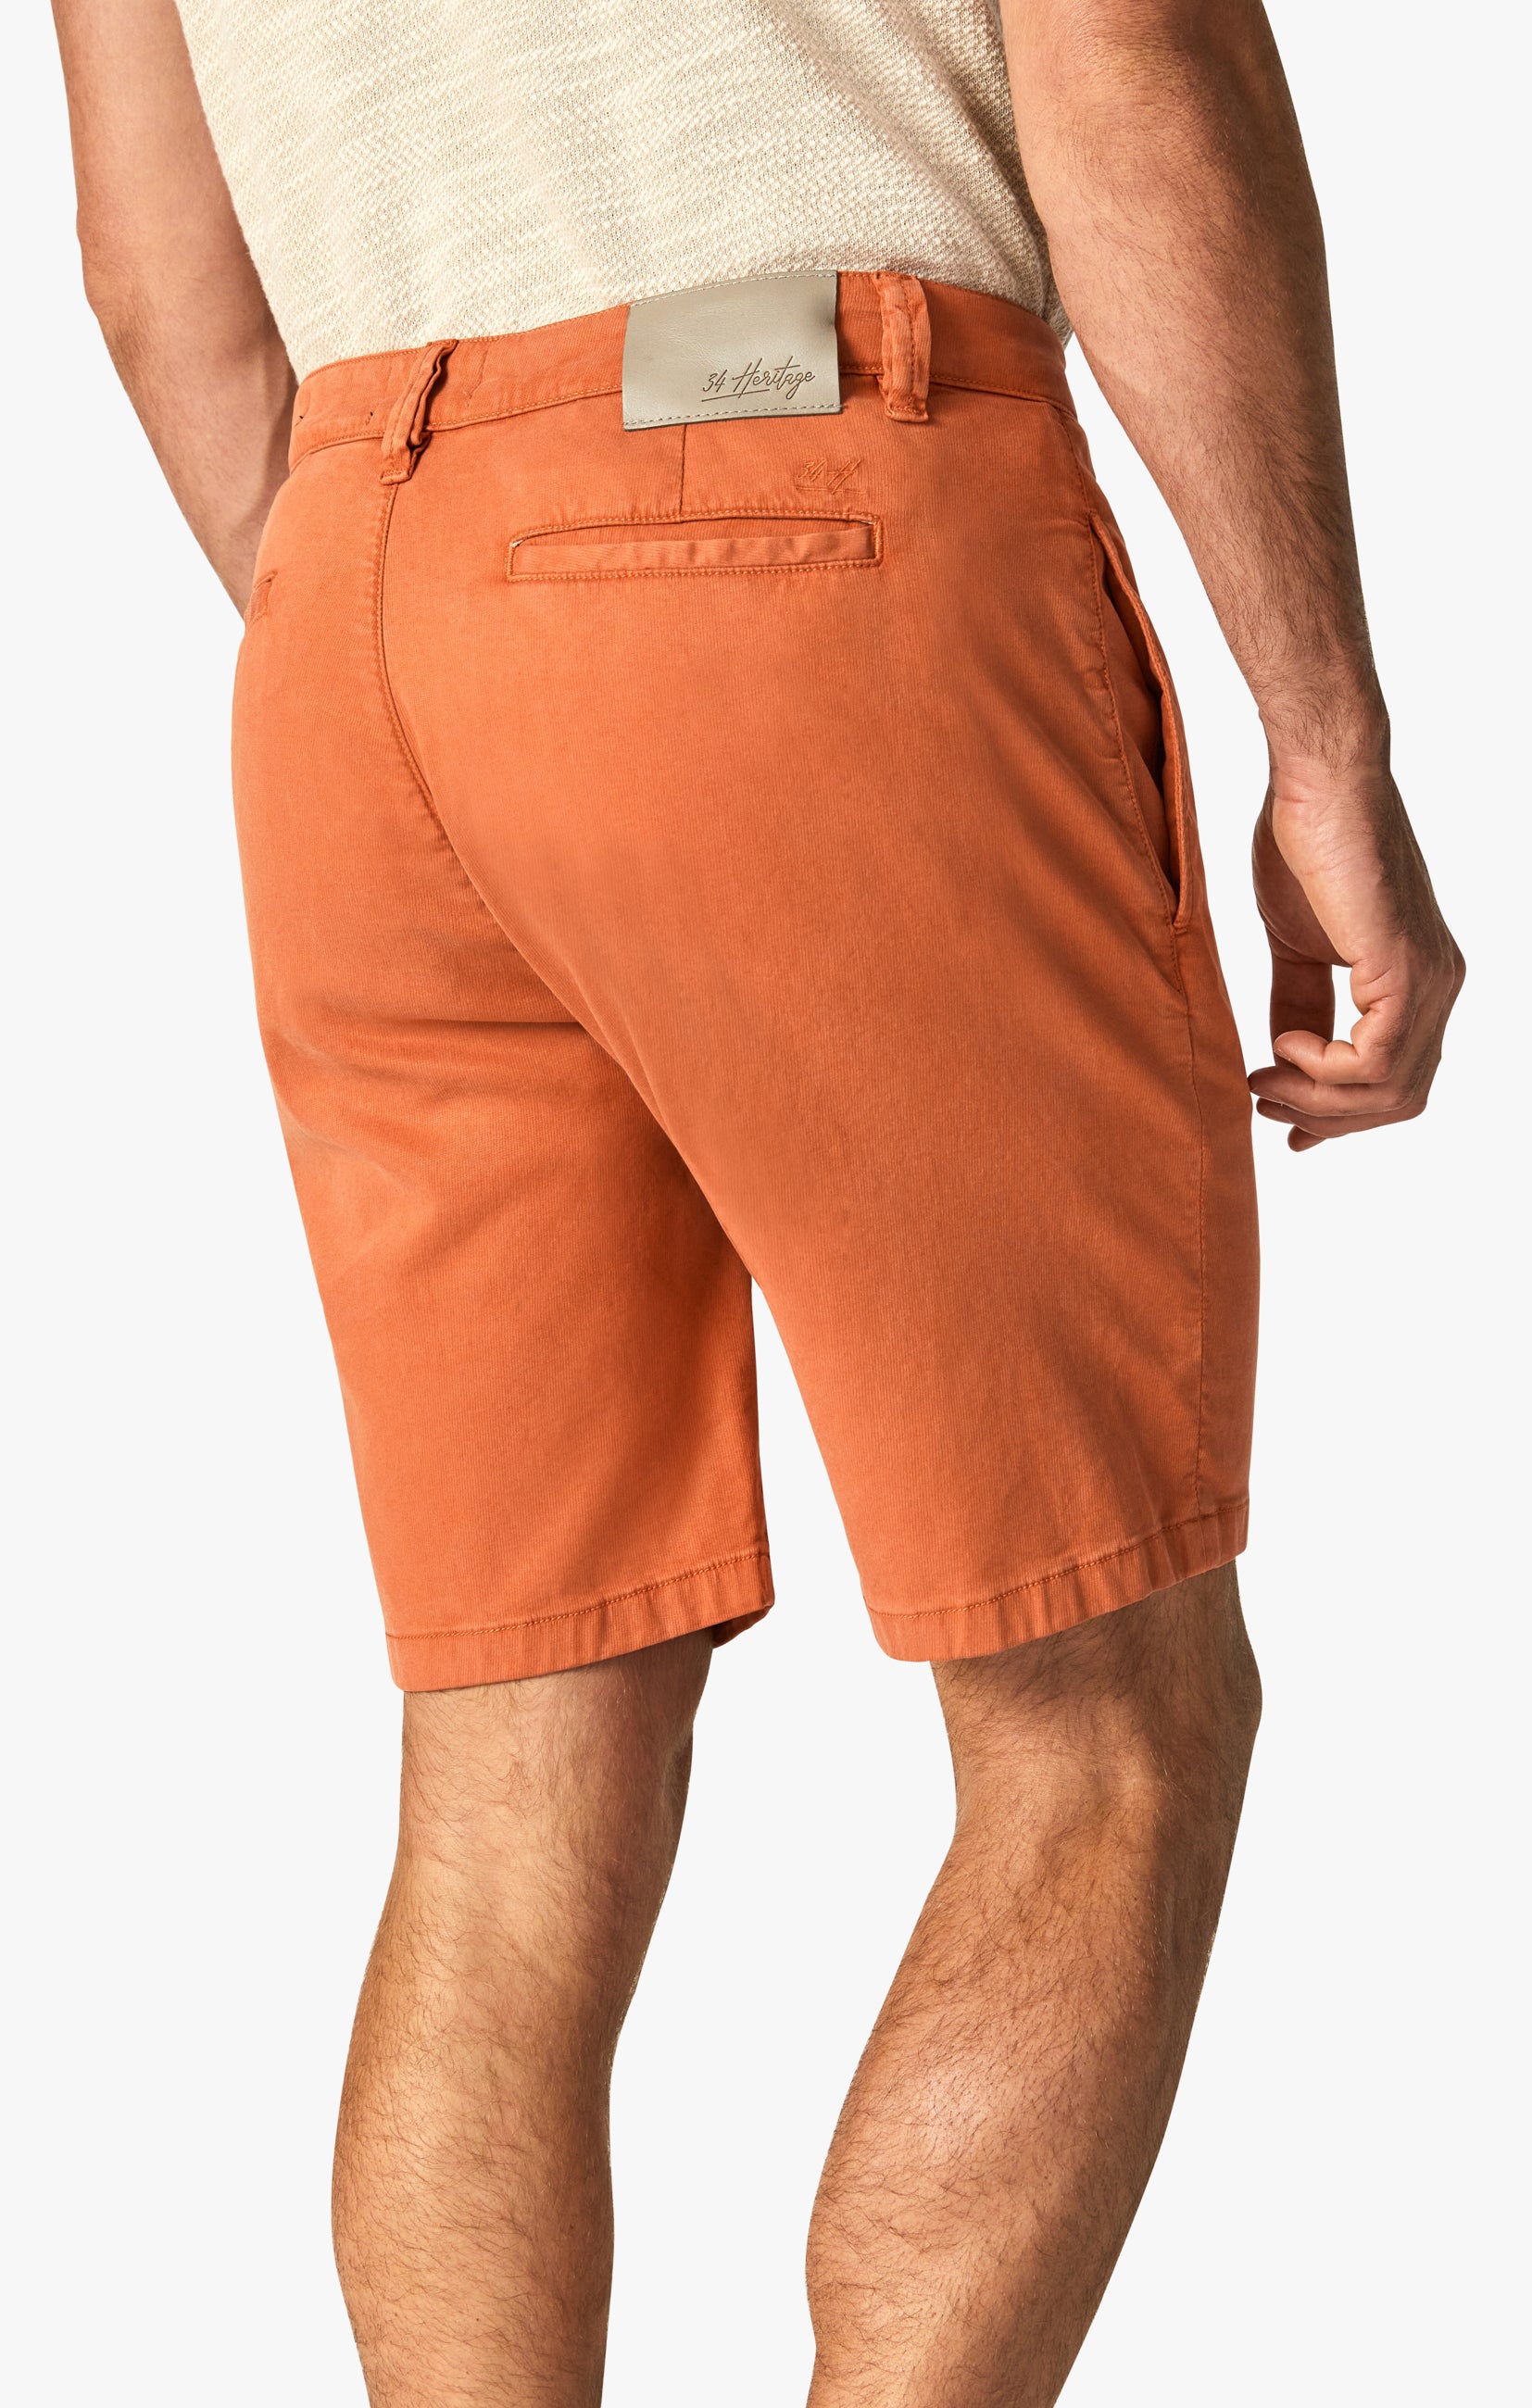 Nevada Shorts In Orange Rust Soft Touch Image 4